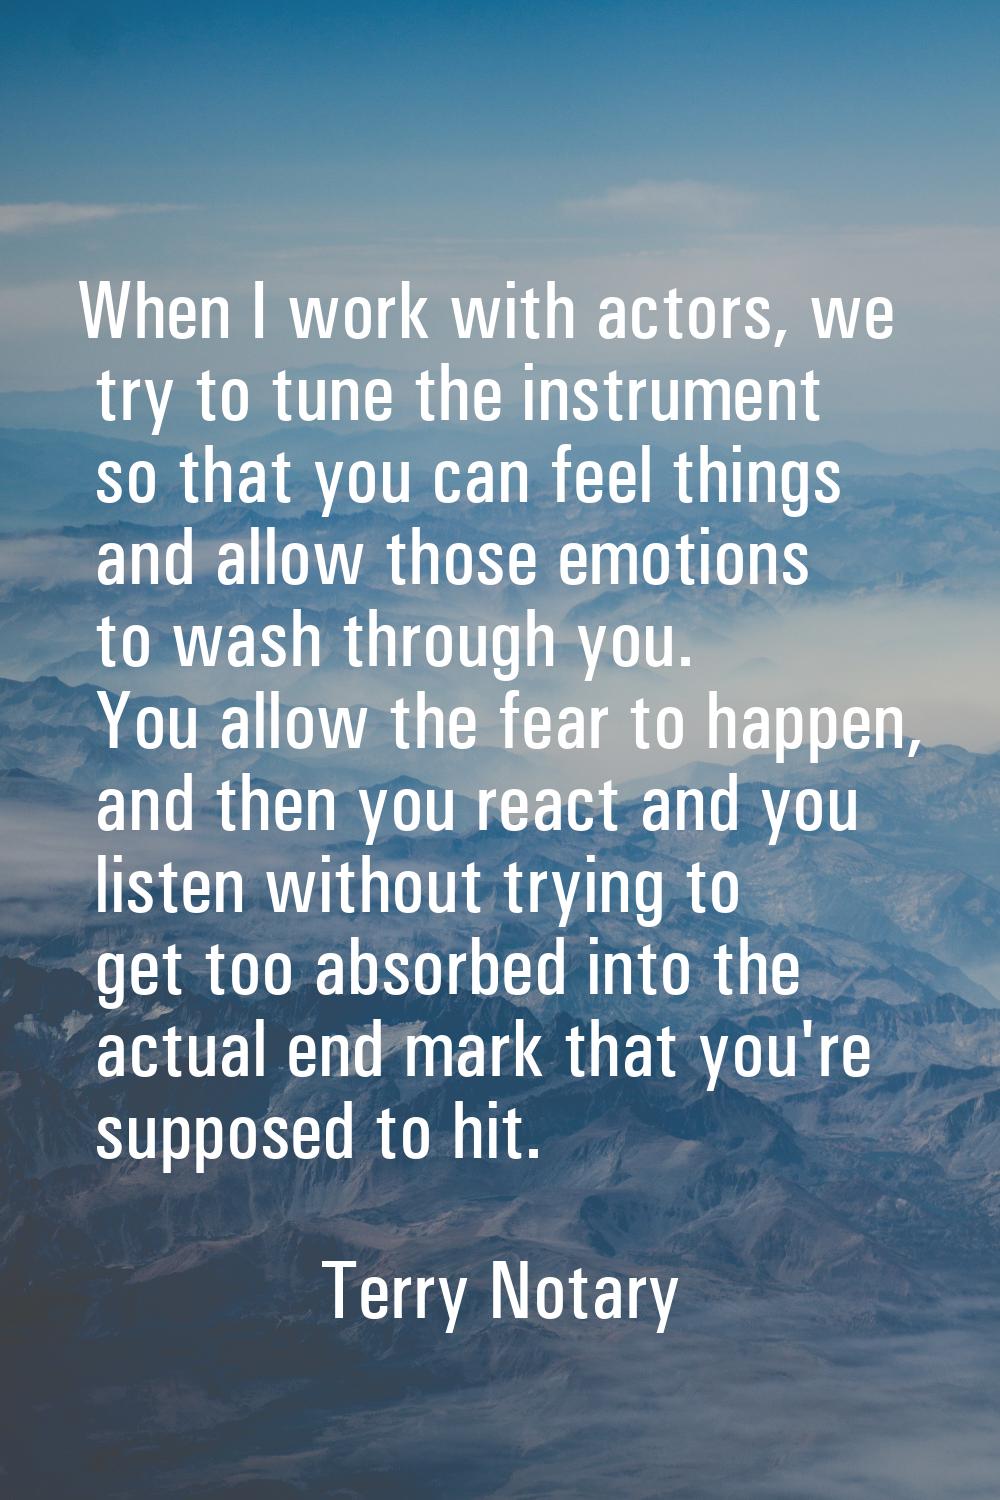 When I work with actors, we try to tune the instrument so that you can feel things and allow those 